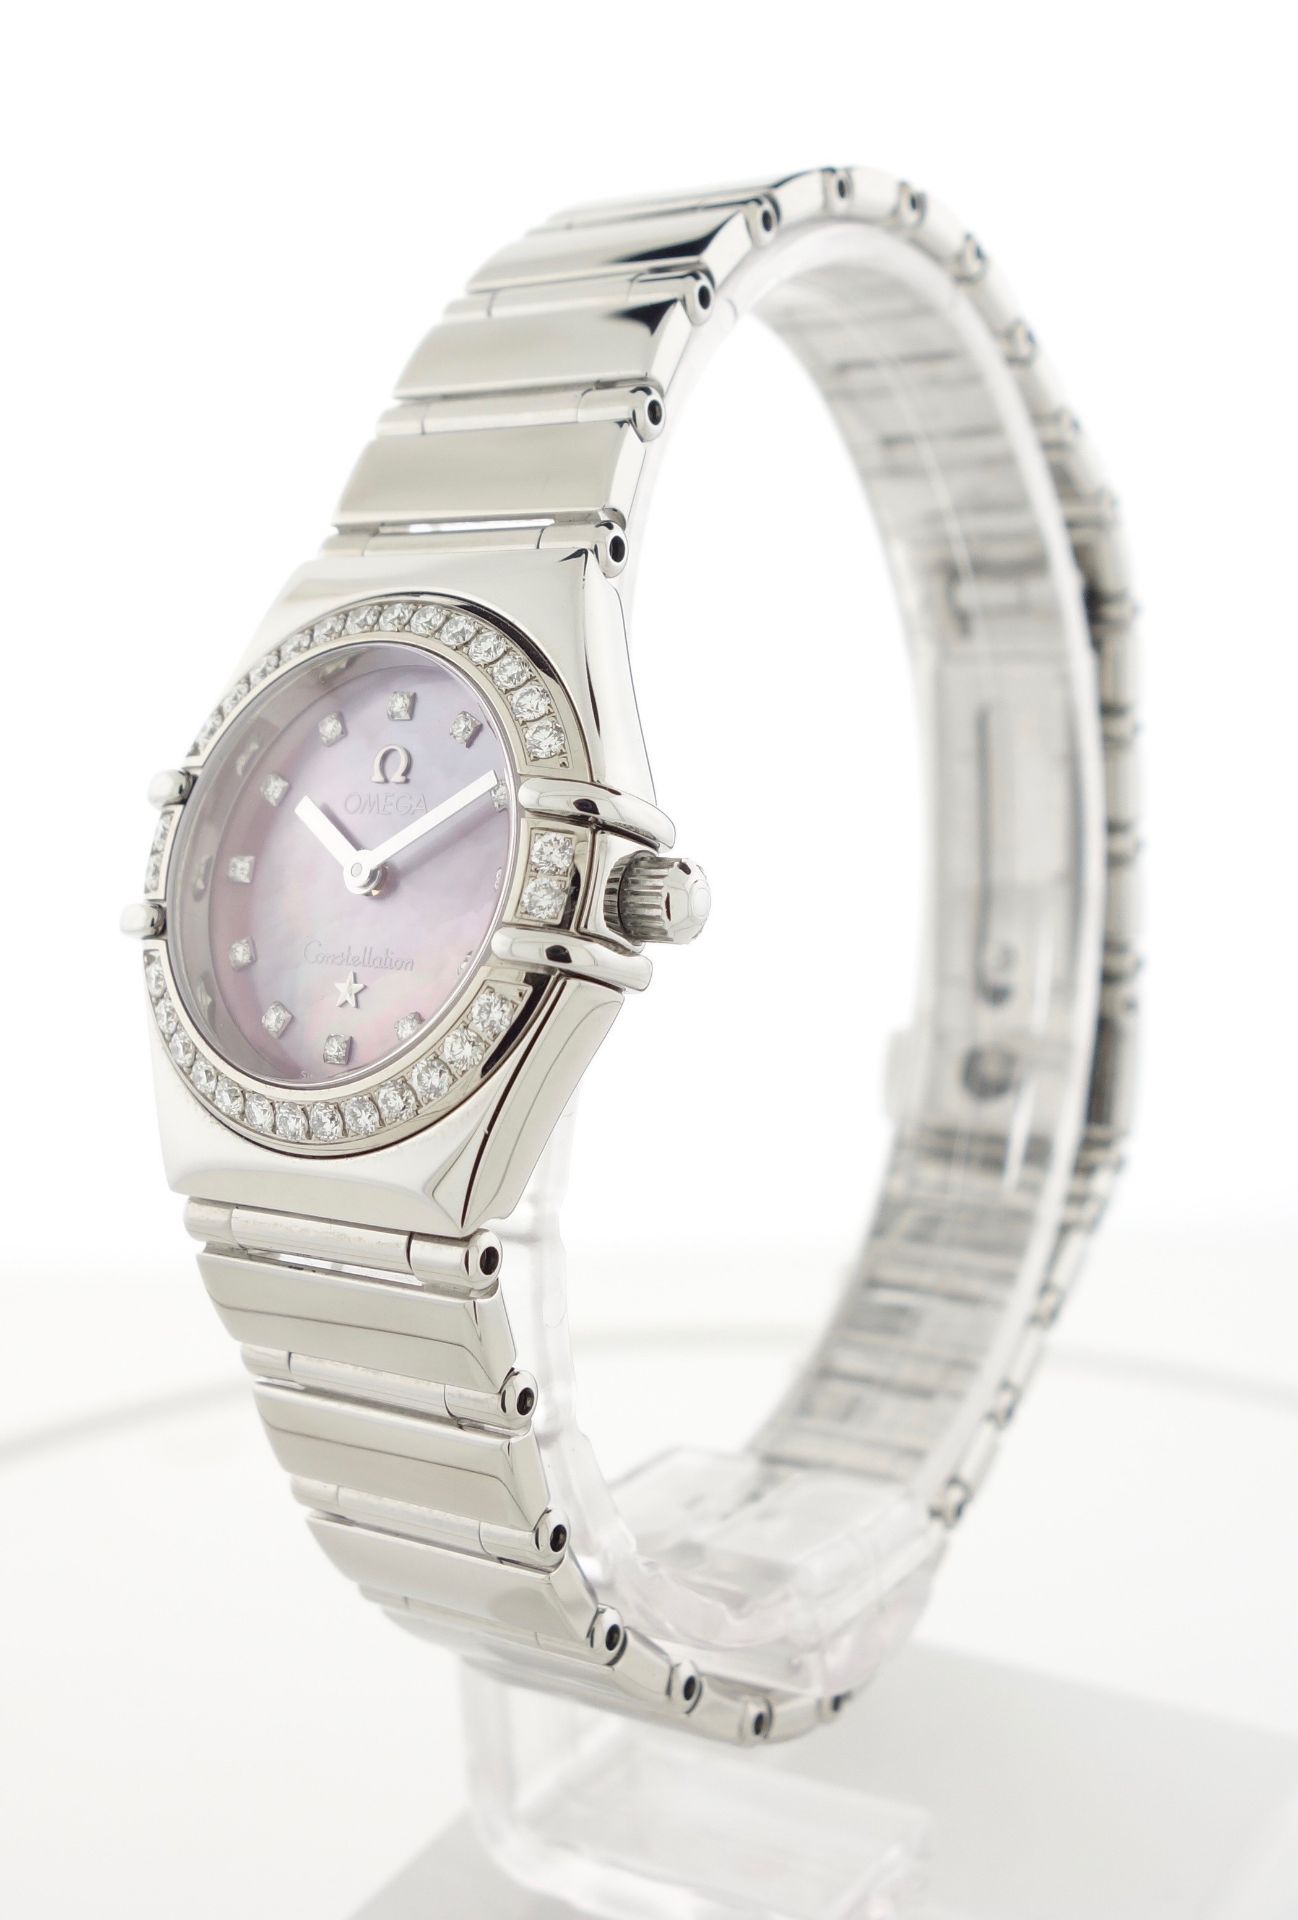 Omega Lady "My Choice" Constellation - 1457.78.00 - Image 3 of 4